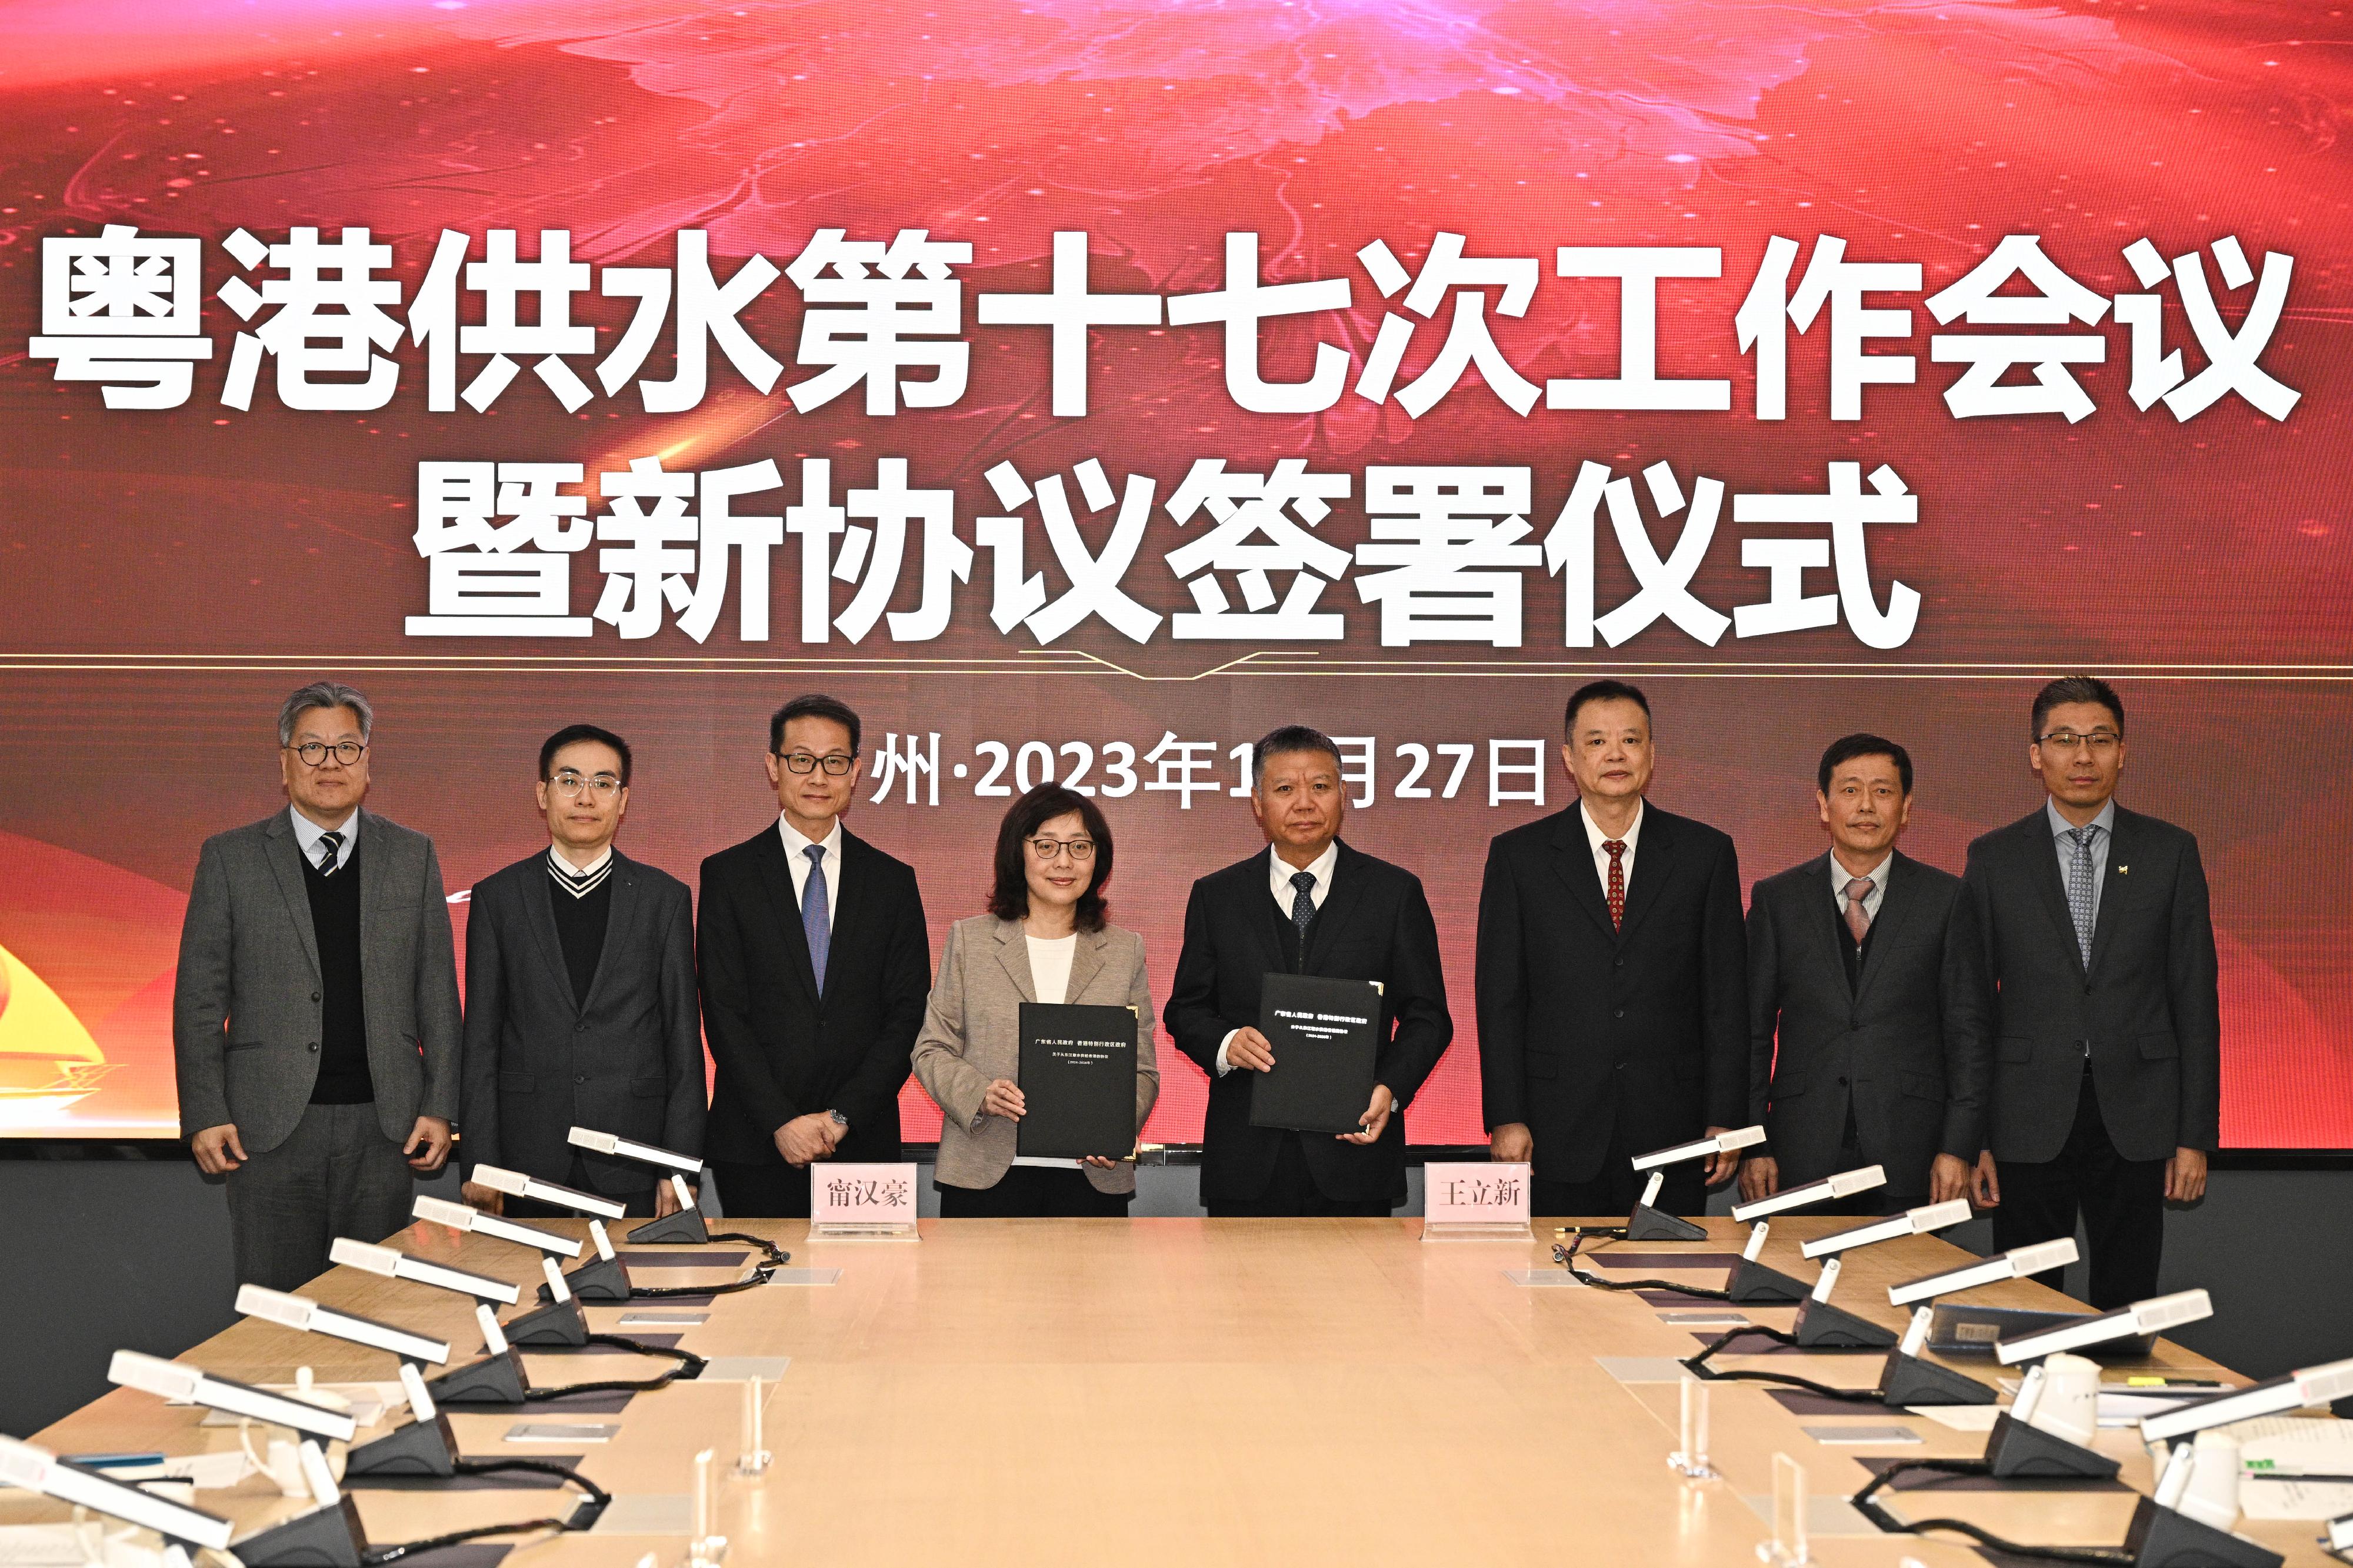 The Secretary for Development, Ms Bernadette Linn, signed a new agreement on the supply of Dongjiang water to Hong Kong from 2024 to 2026 with the Director General of the Water Resources Department of Guangdong Province, Mr Wang Lixin, in Guangzhou today (December 27). Photo shows Ms Linn (fourth left); Mr Wang (fourth right); the Director of Water Supplies, Mr Tony Yau (third left); and other Guangdong and Hong Kong representatives after the signing ceremony.